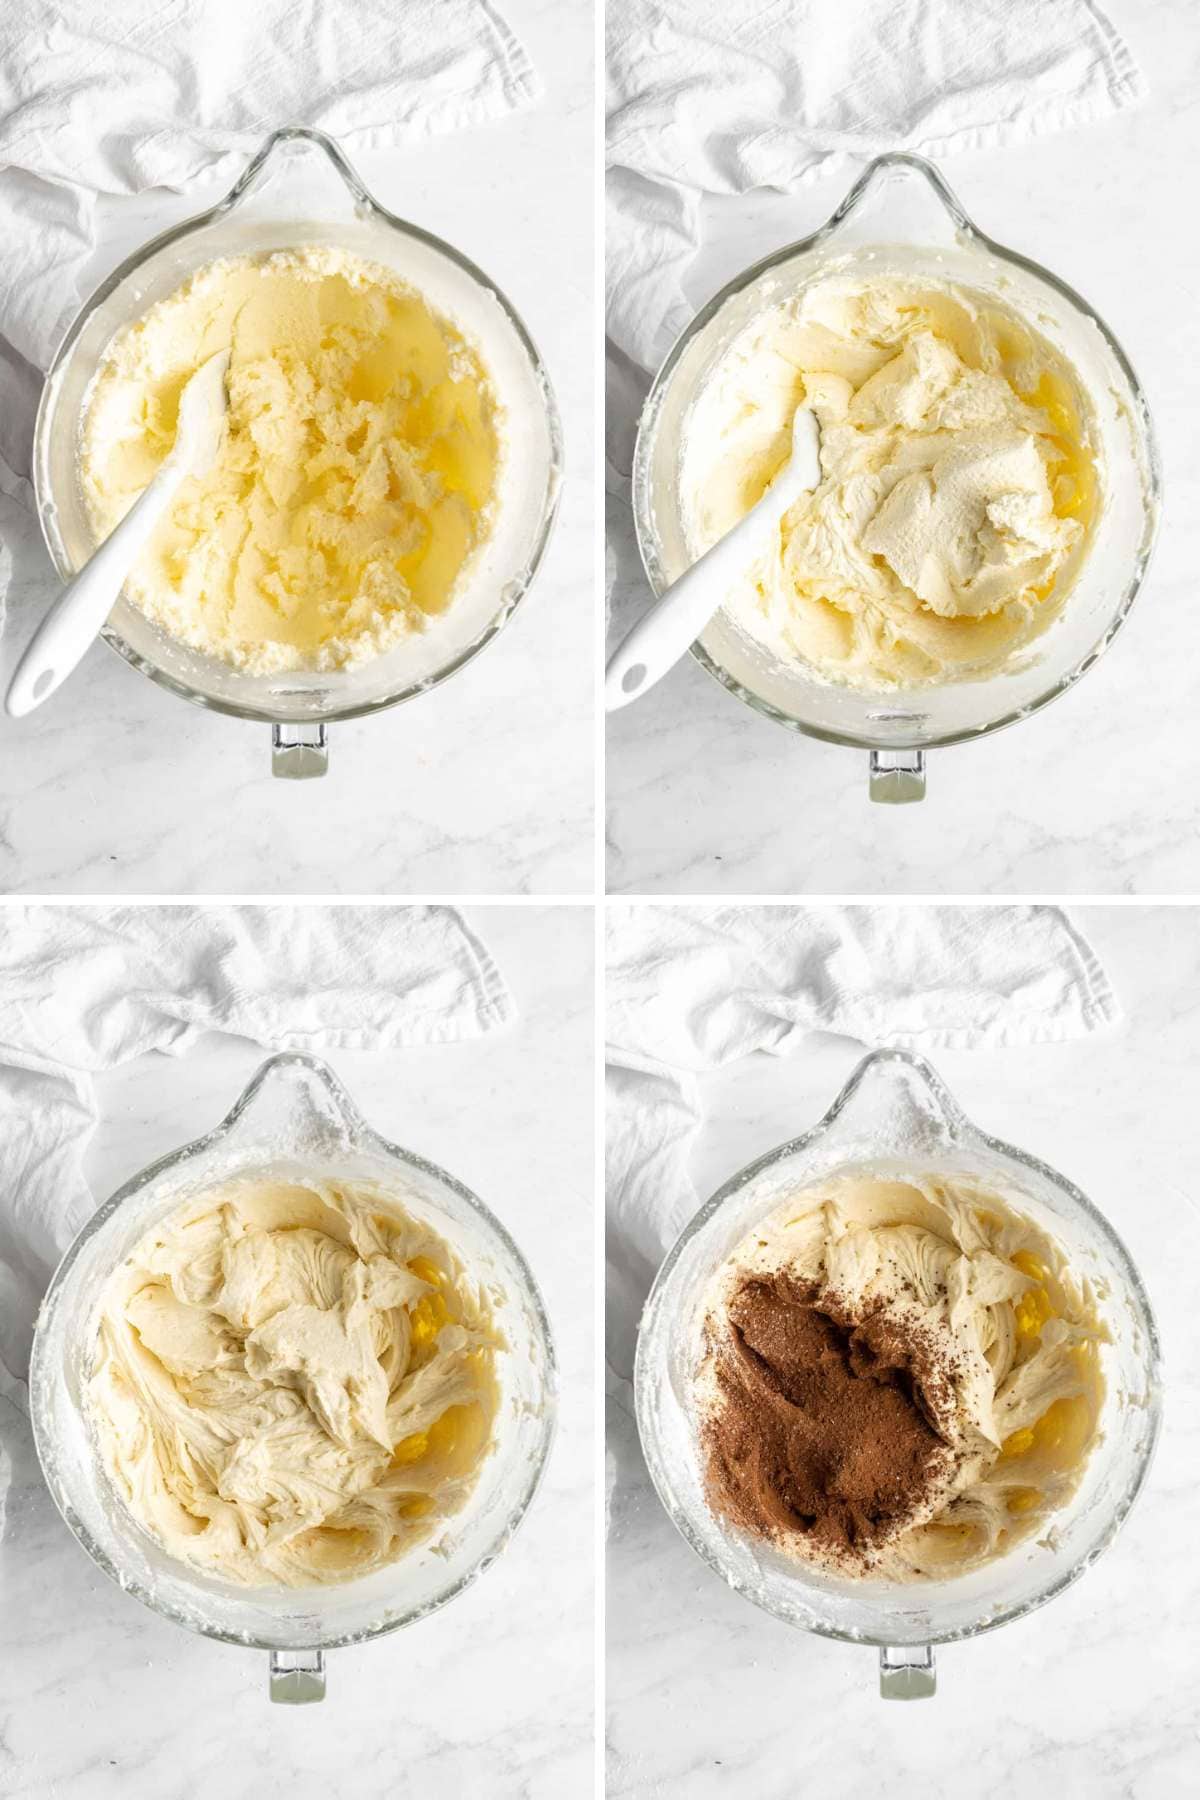 Collage of images showing the mixing of the cake batter.